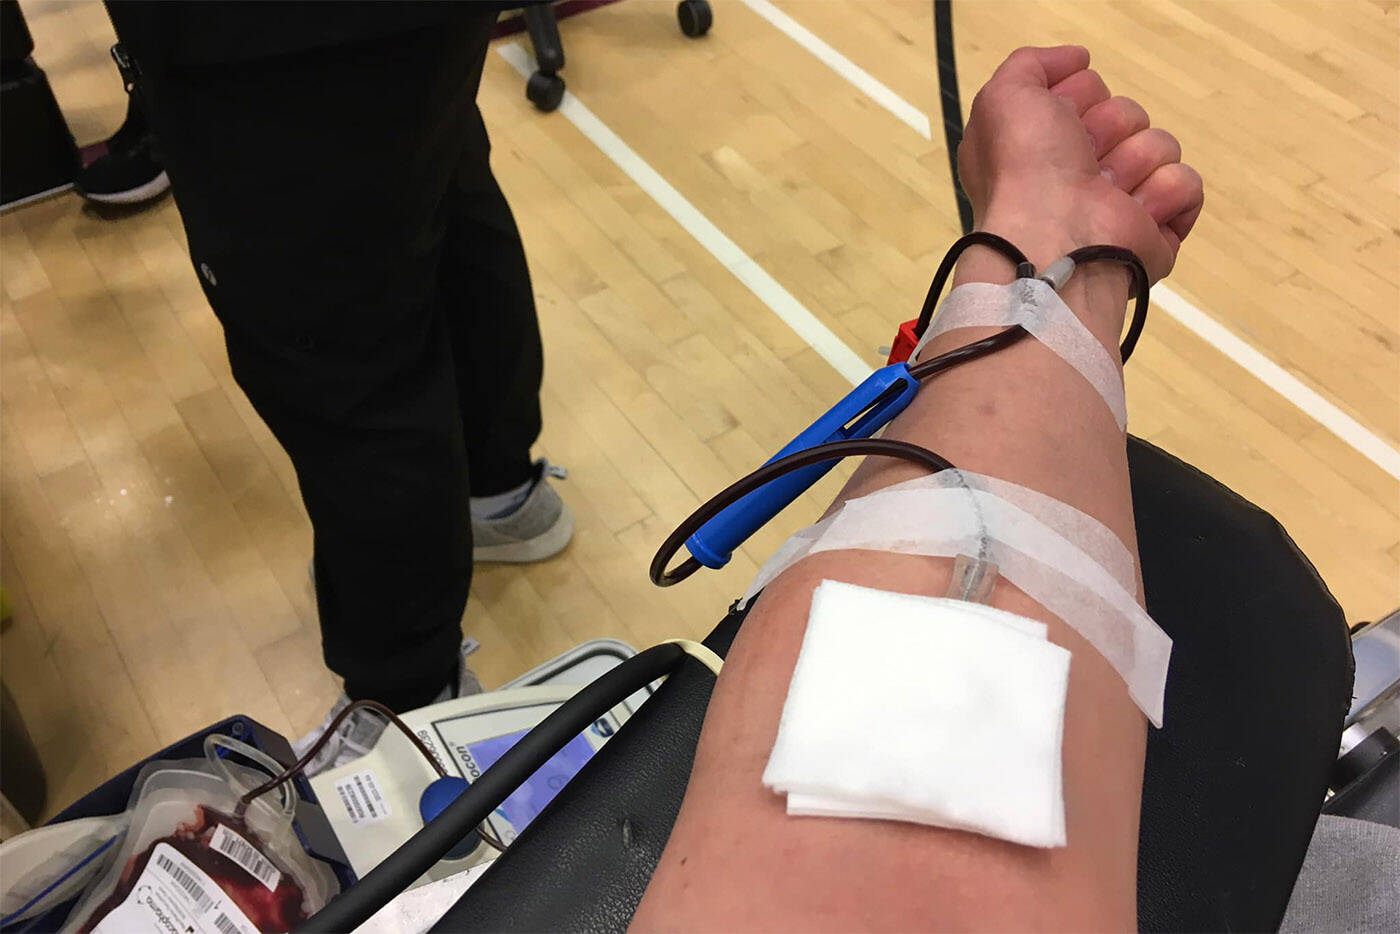 Canadian Blood Services hopes residents will give the gift of blood this Thanksgiving season. (Black Press Media file photo)